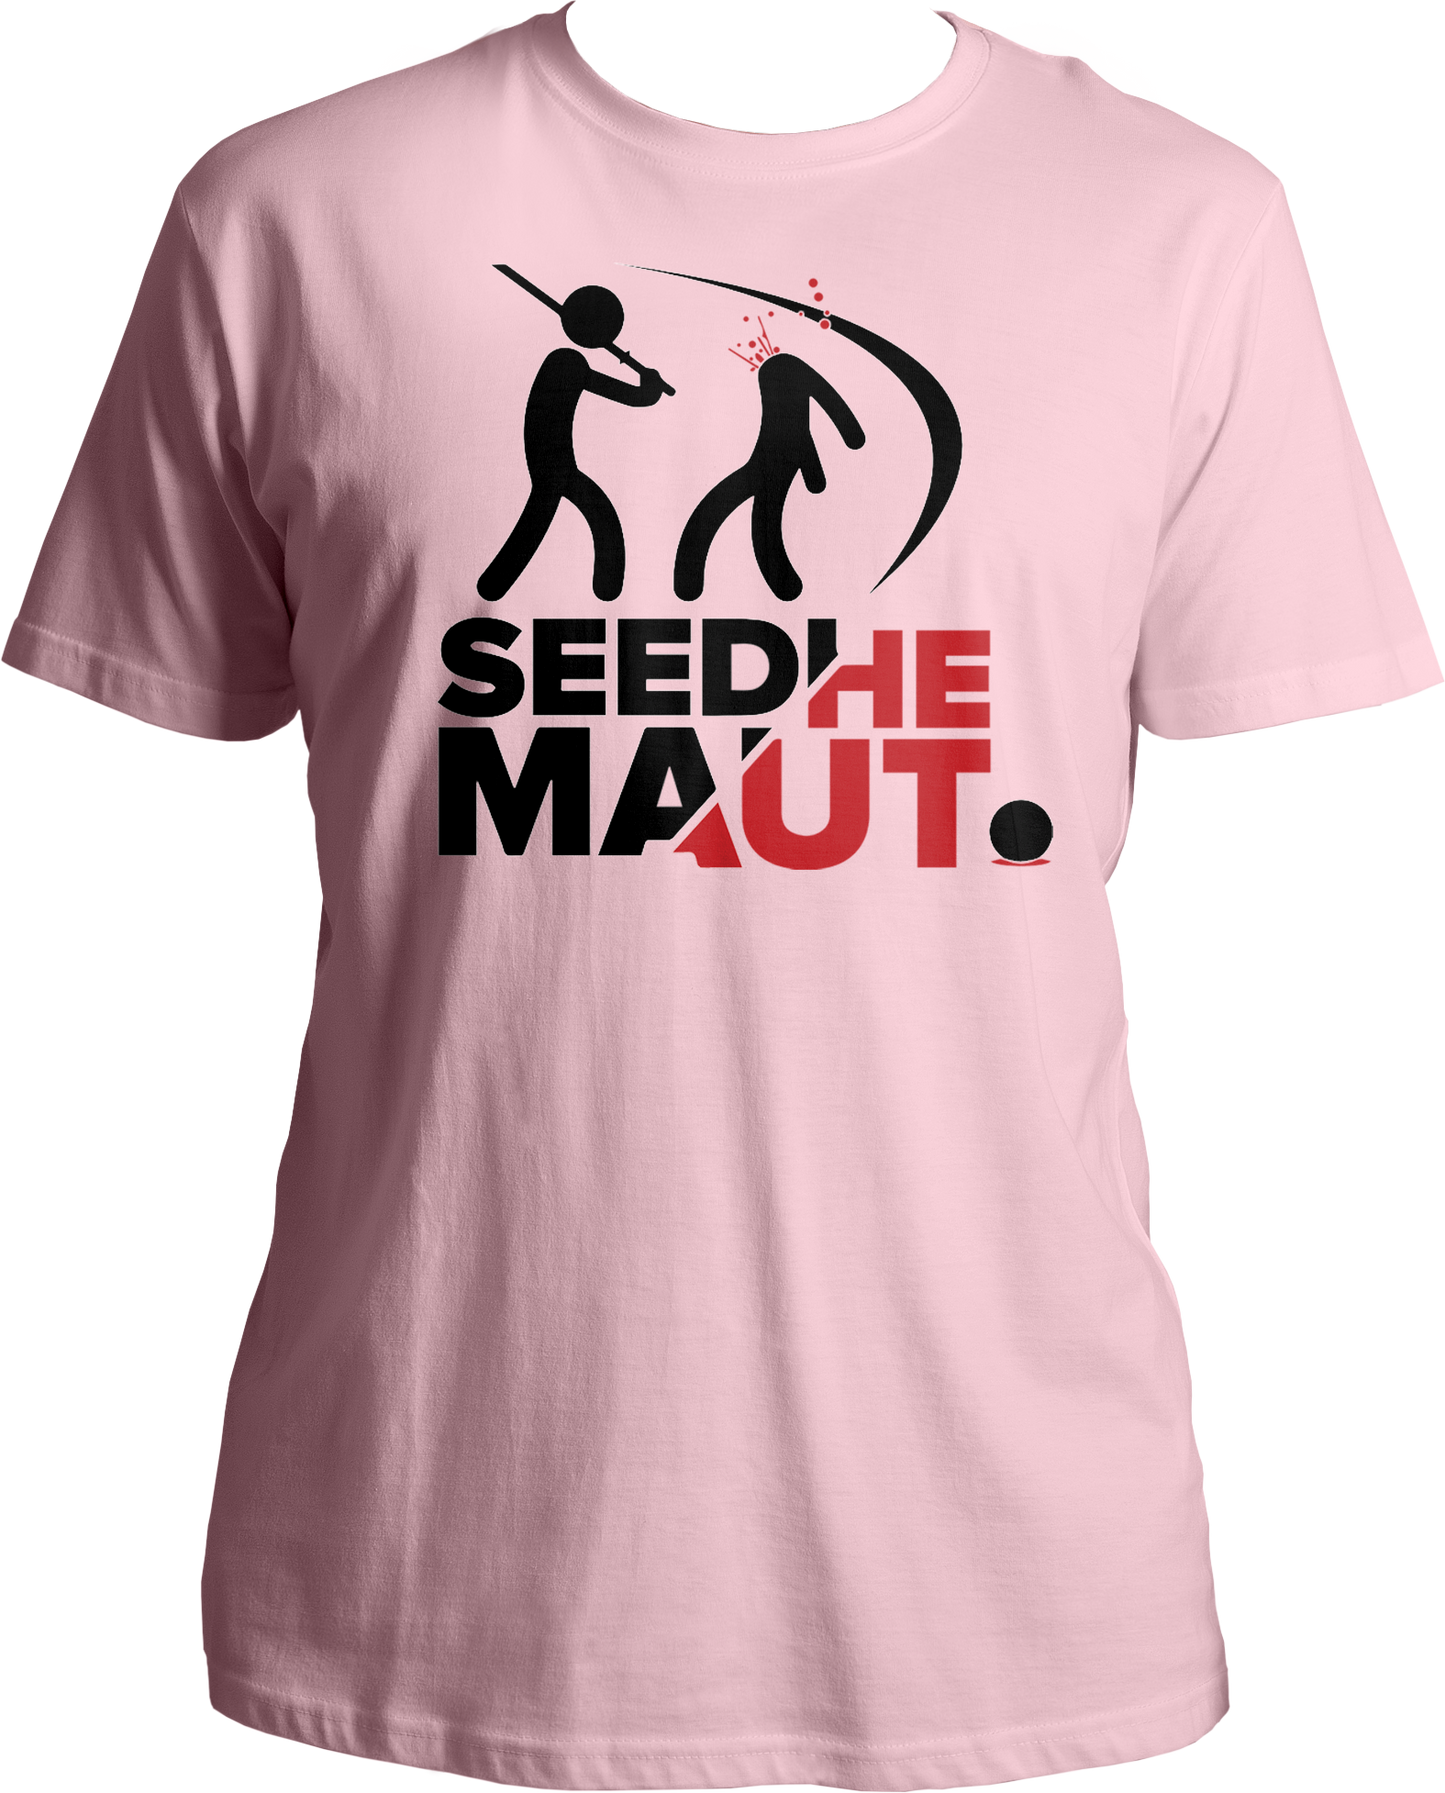 Step into the world of Indian hip-hop with our exclusive Seedhe Maut T-Shirt, designed for true fans of the duo's electrifying music and lyrical prowess.  Featuring a bold and stylish design inspired by Seedhe Maut's iconic logo, this unisex t-shirt is a must-have for anyone who appreciates the raw energy and authenticity of Indian rap.